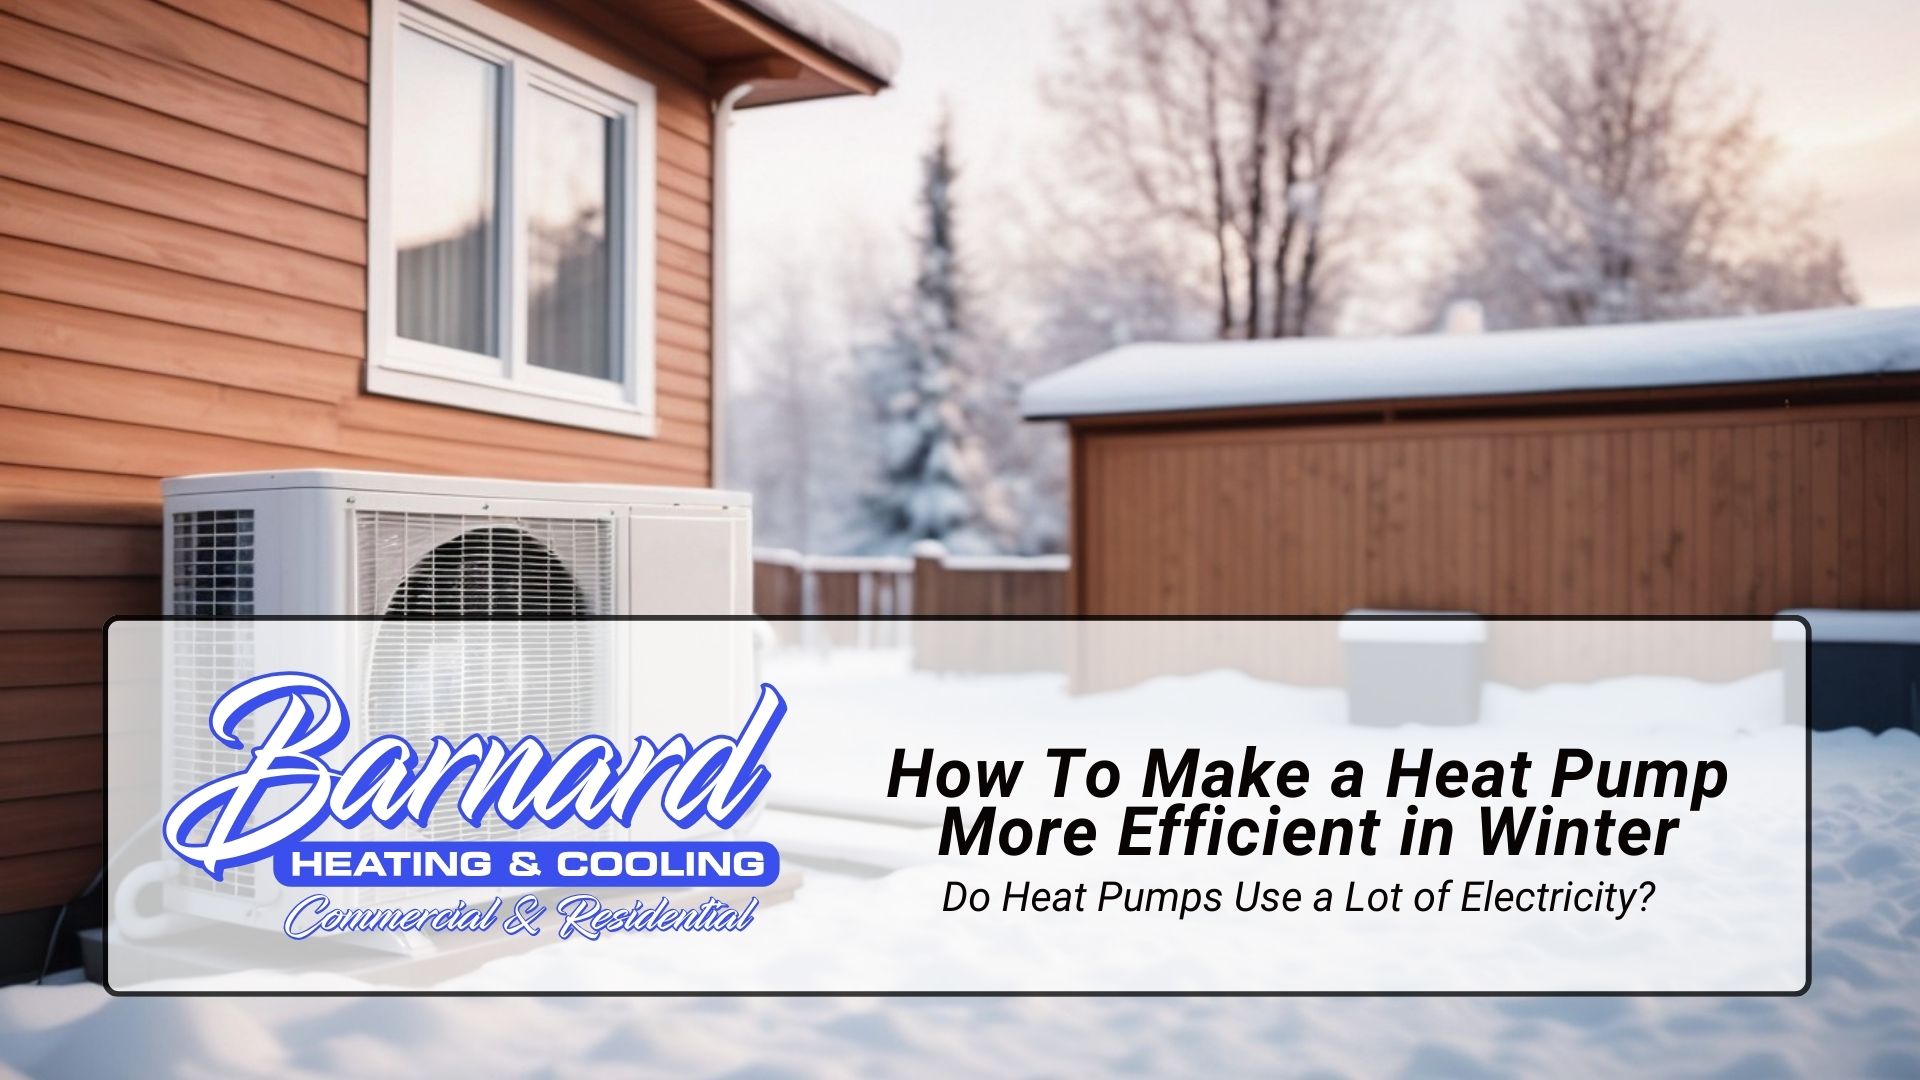 How To Make a Heat Pump More Efficient in Winter